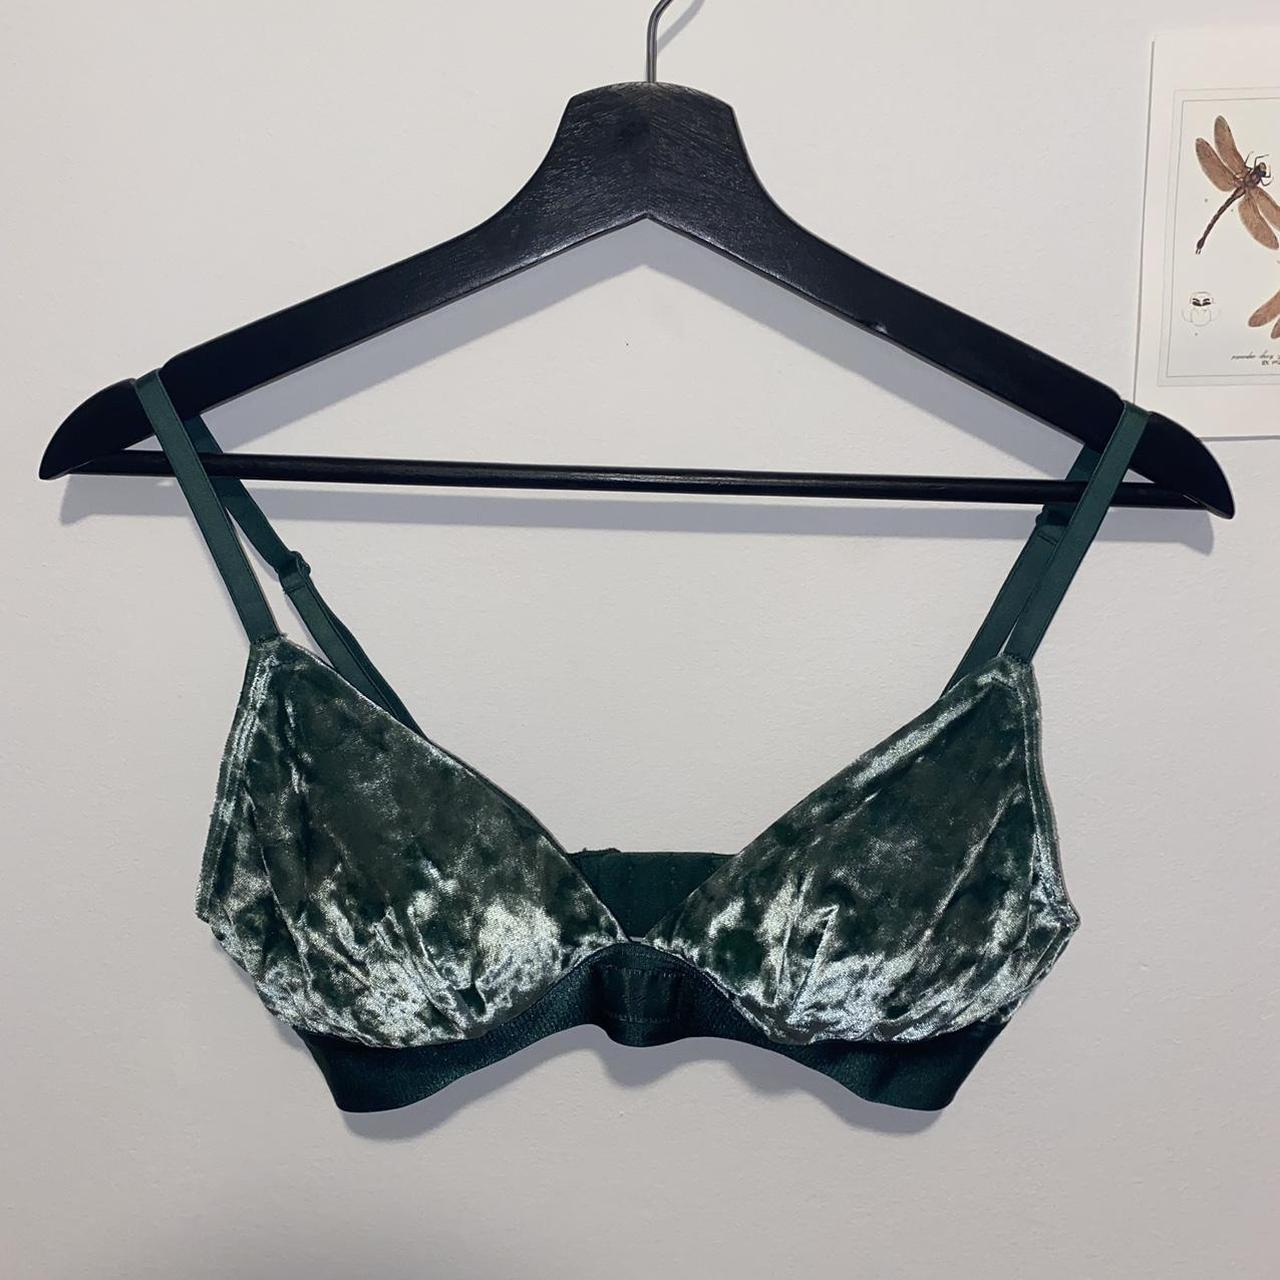 Small (34A - 34B according to website) 2022 green - Depop